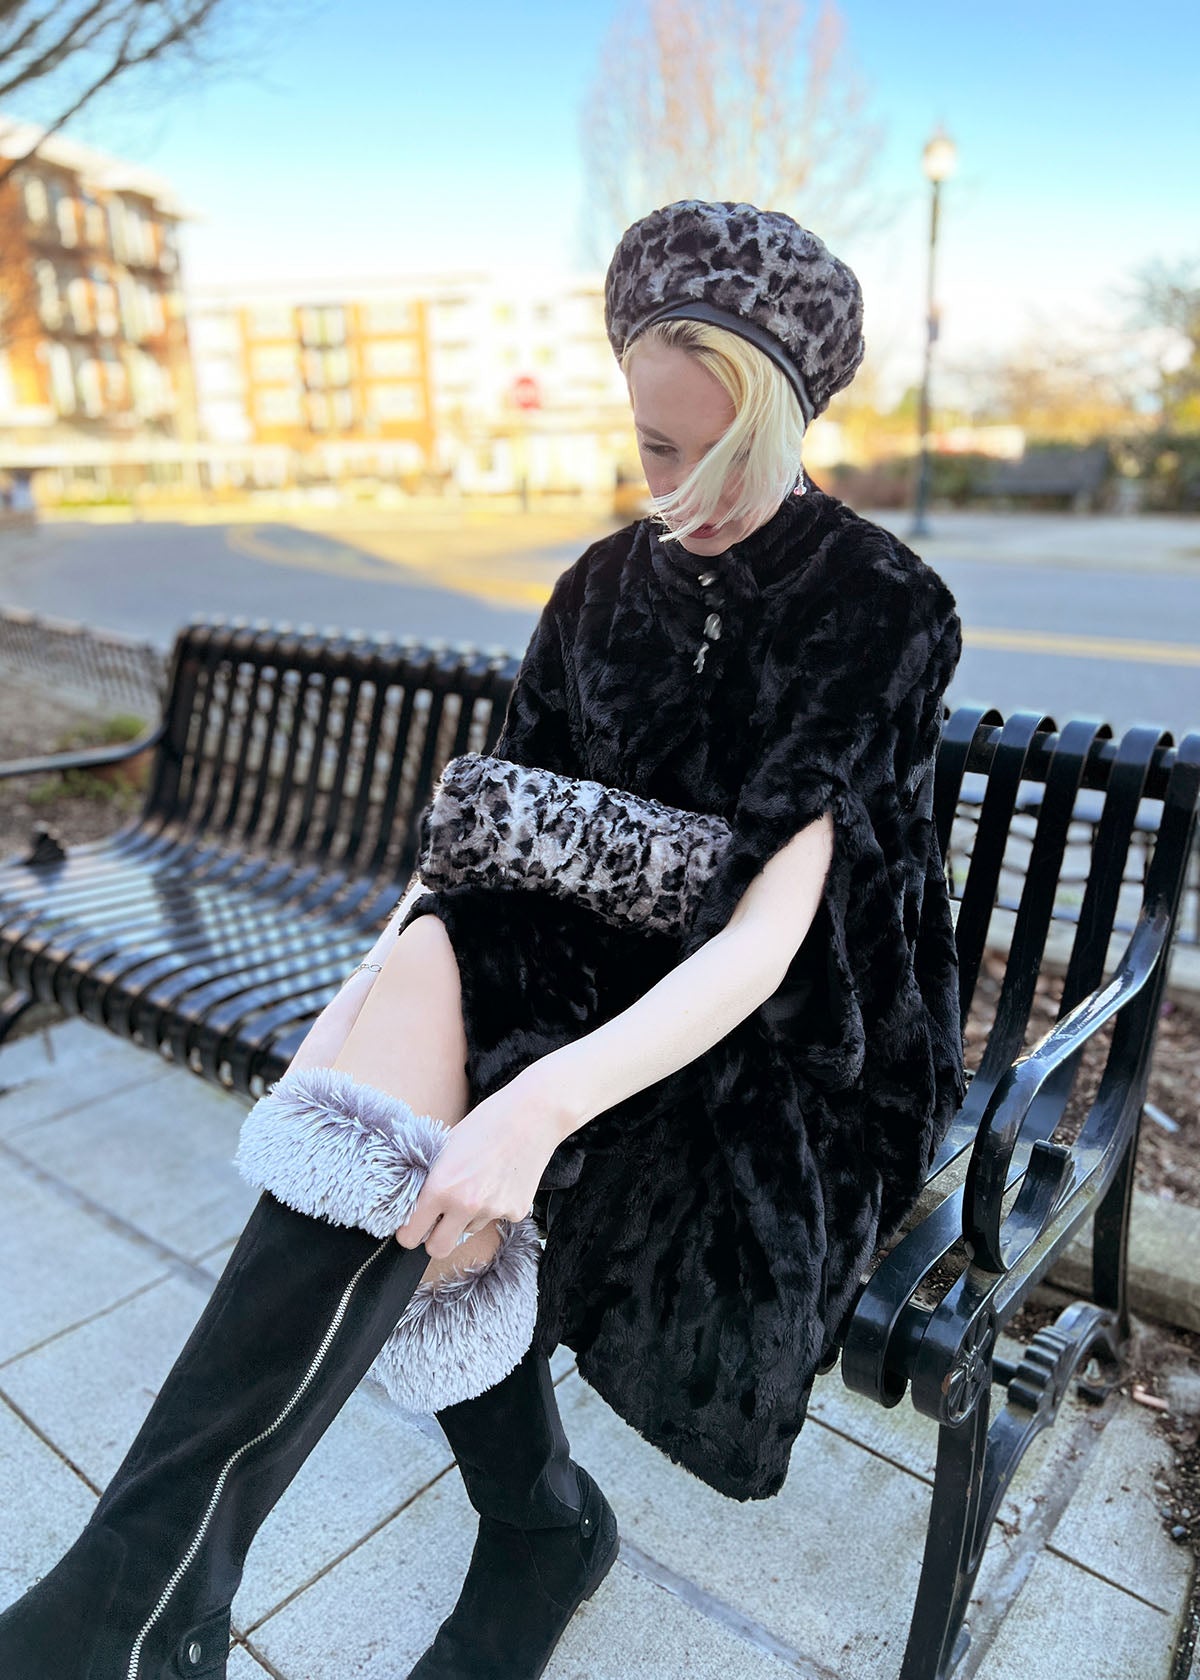 Boot Toppers and Long Cape | Cuddly Black and Pearl Fox Faux Fur | Handmade in Seattle WA USA by Pandemonium Millinery